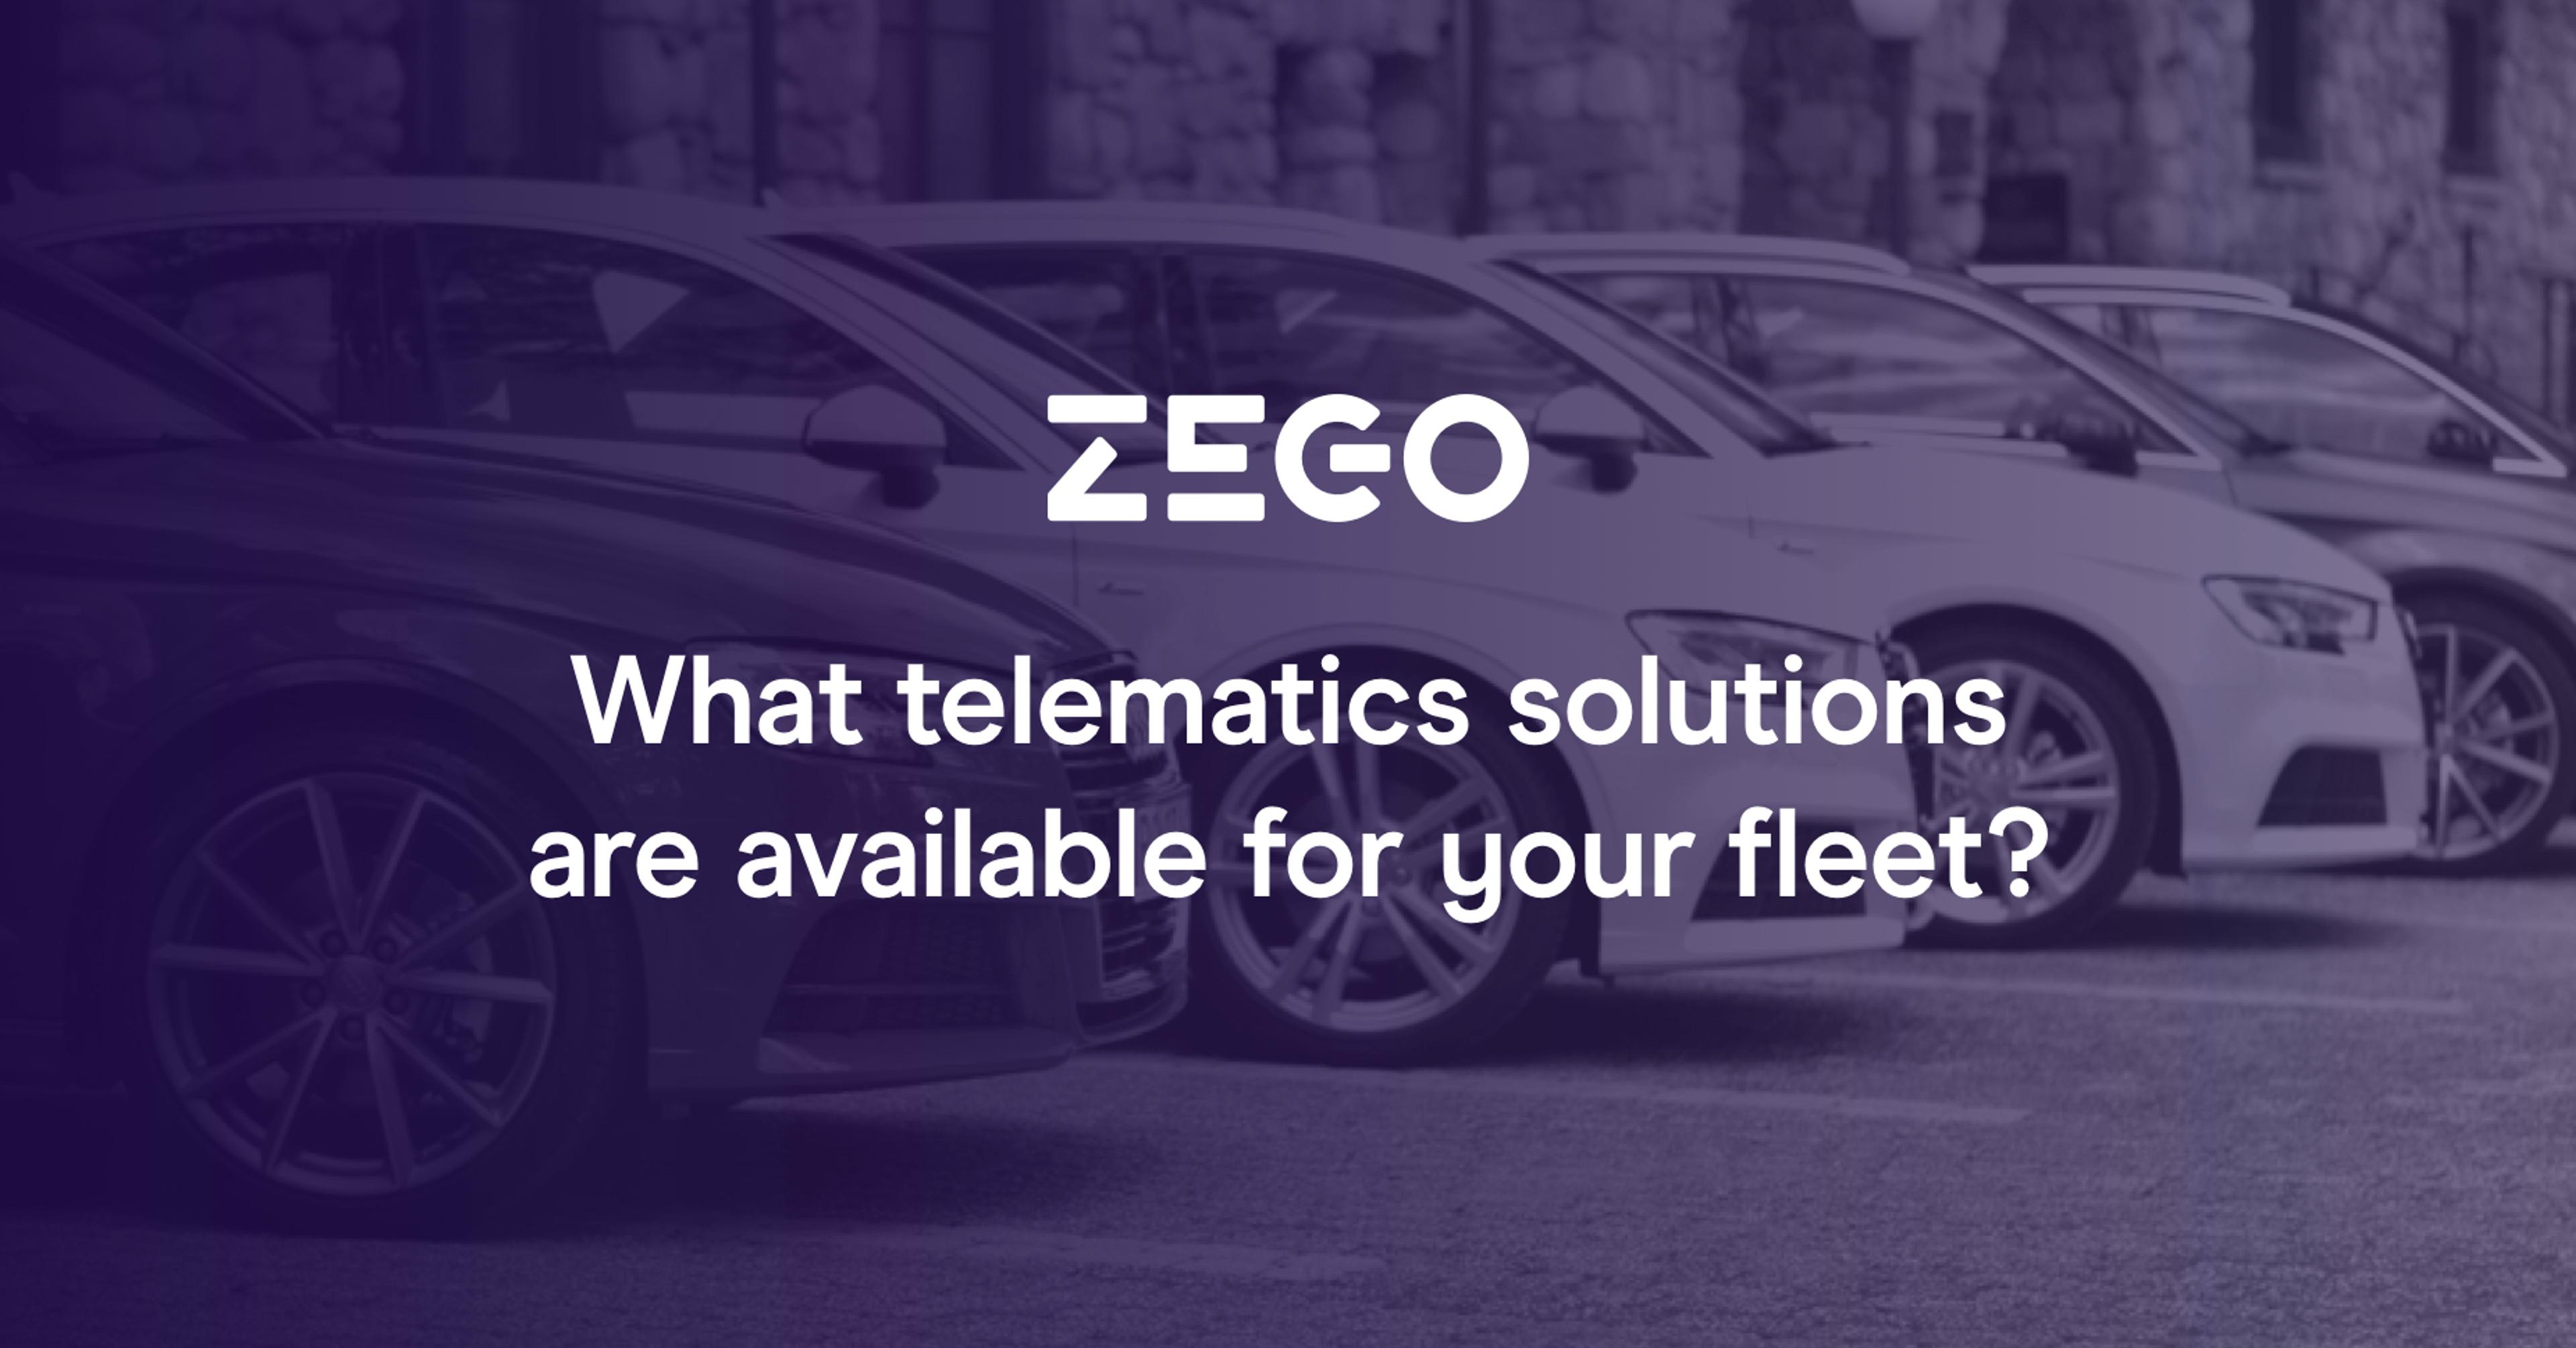 What telematics solutions are available for your fleet?